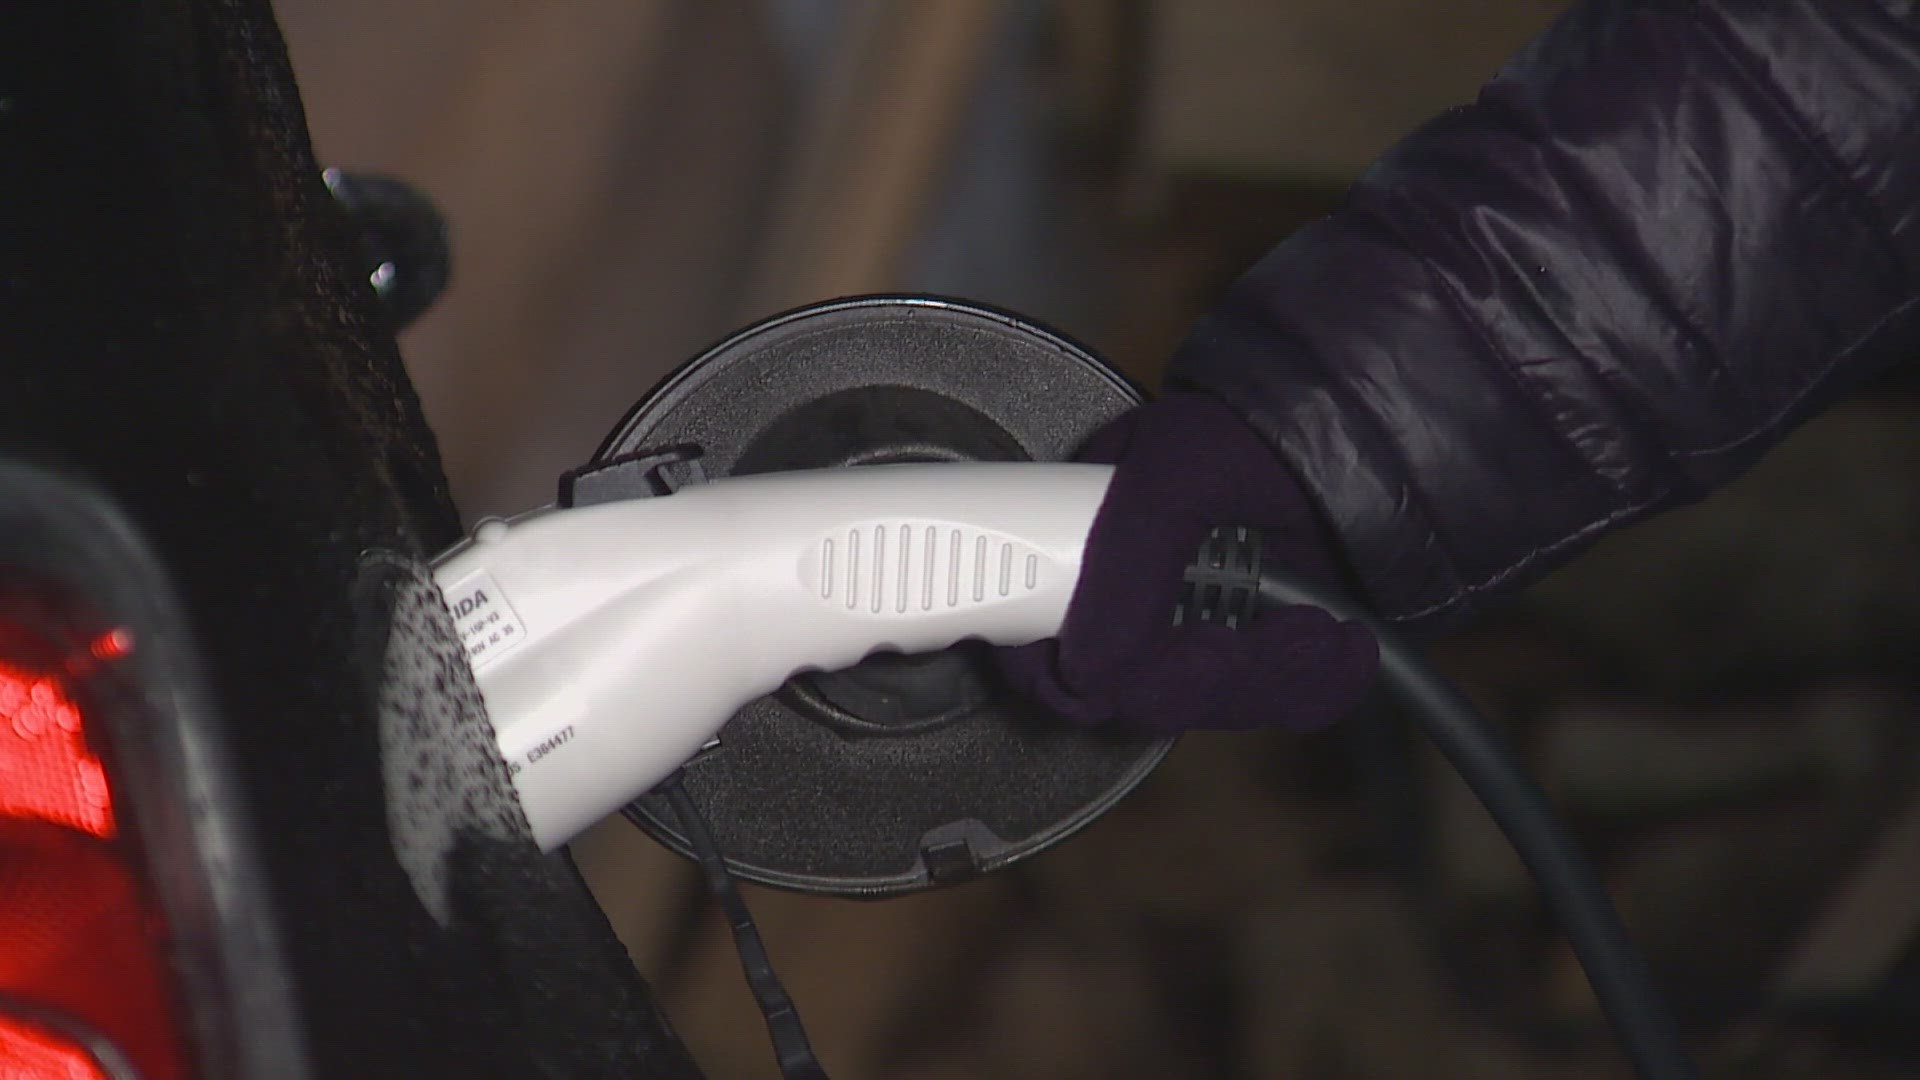 One Seattle woman shared her recent experience when a copper wire thief entered her covered carport and cut her charging cord in several places.